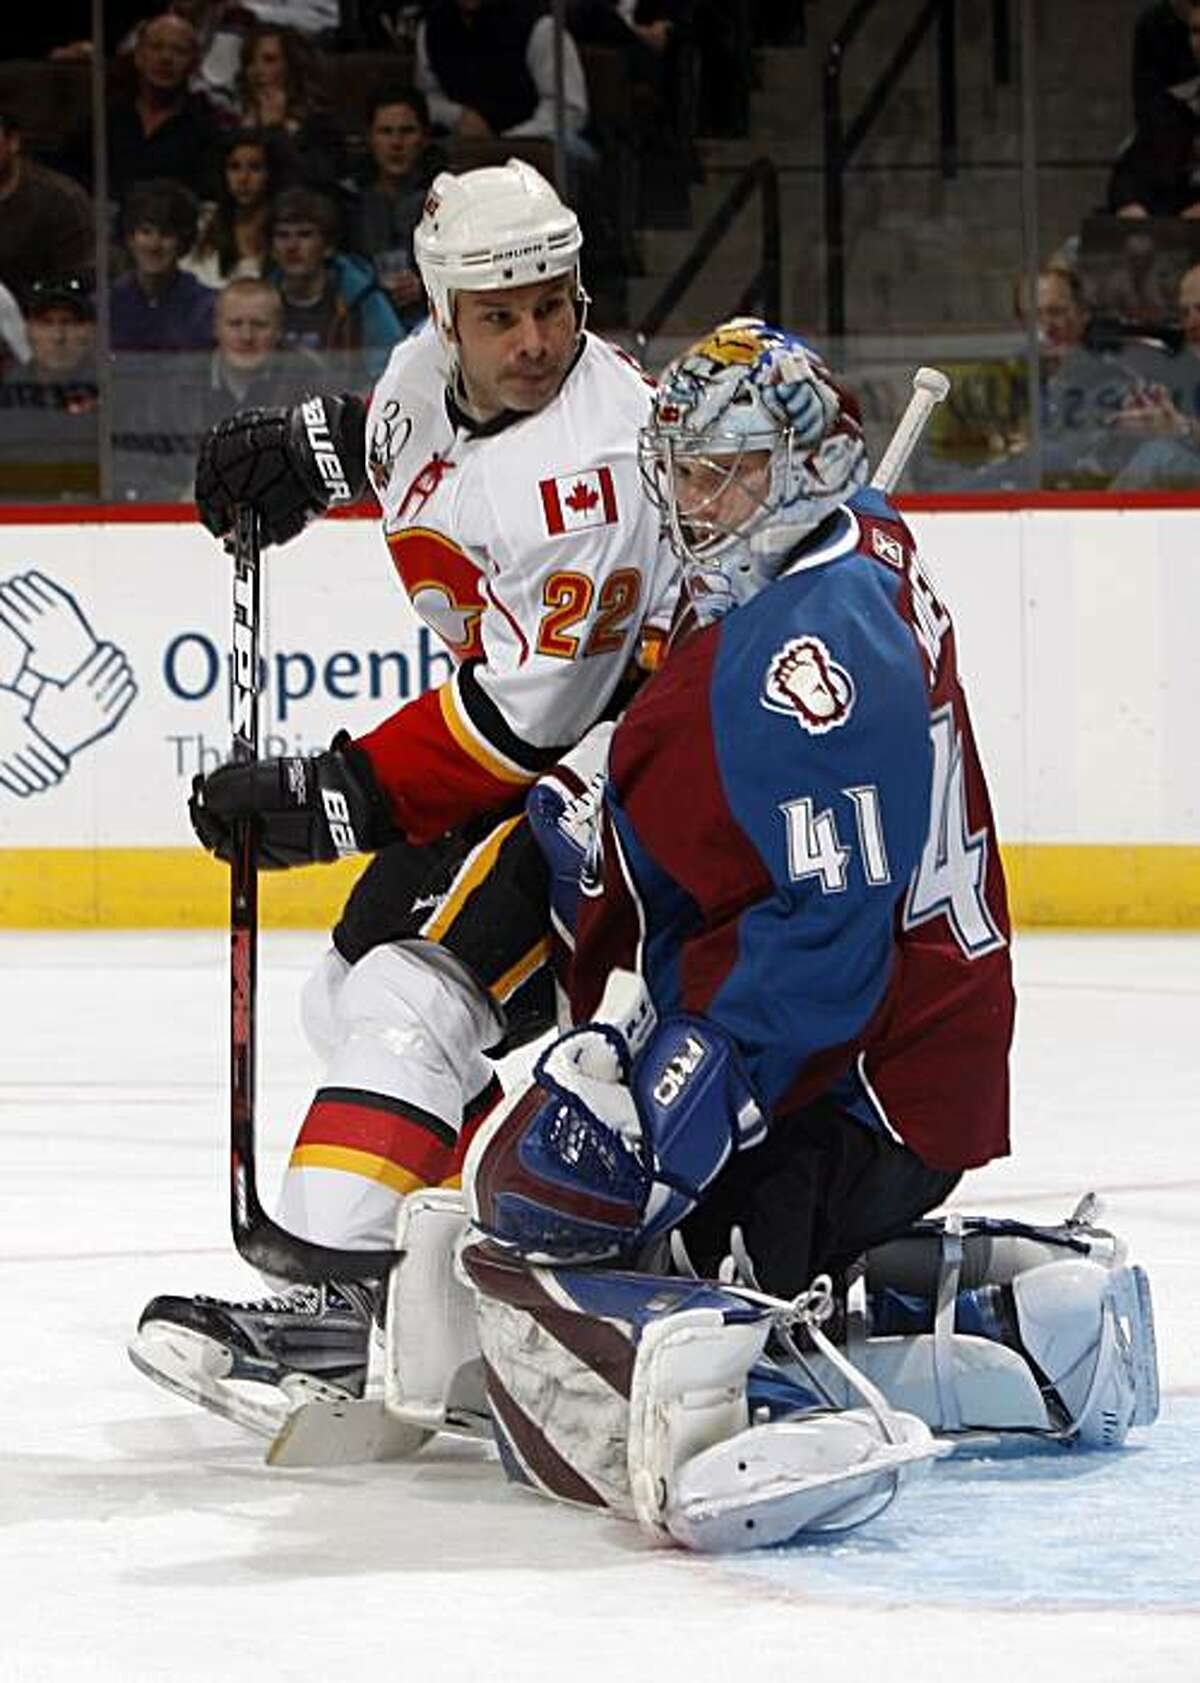 Calgary Flames center Daymond Langkow, left, has his shot stopped by Colorado Avalanche goalie Craig Anderson in the second period of an NHL hockey game in Denver on Sunday, Dec. 13, 2009. (AP Photo/David Zalubowski)